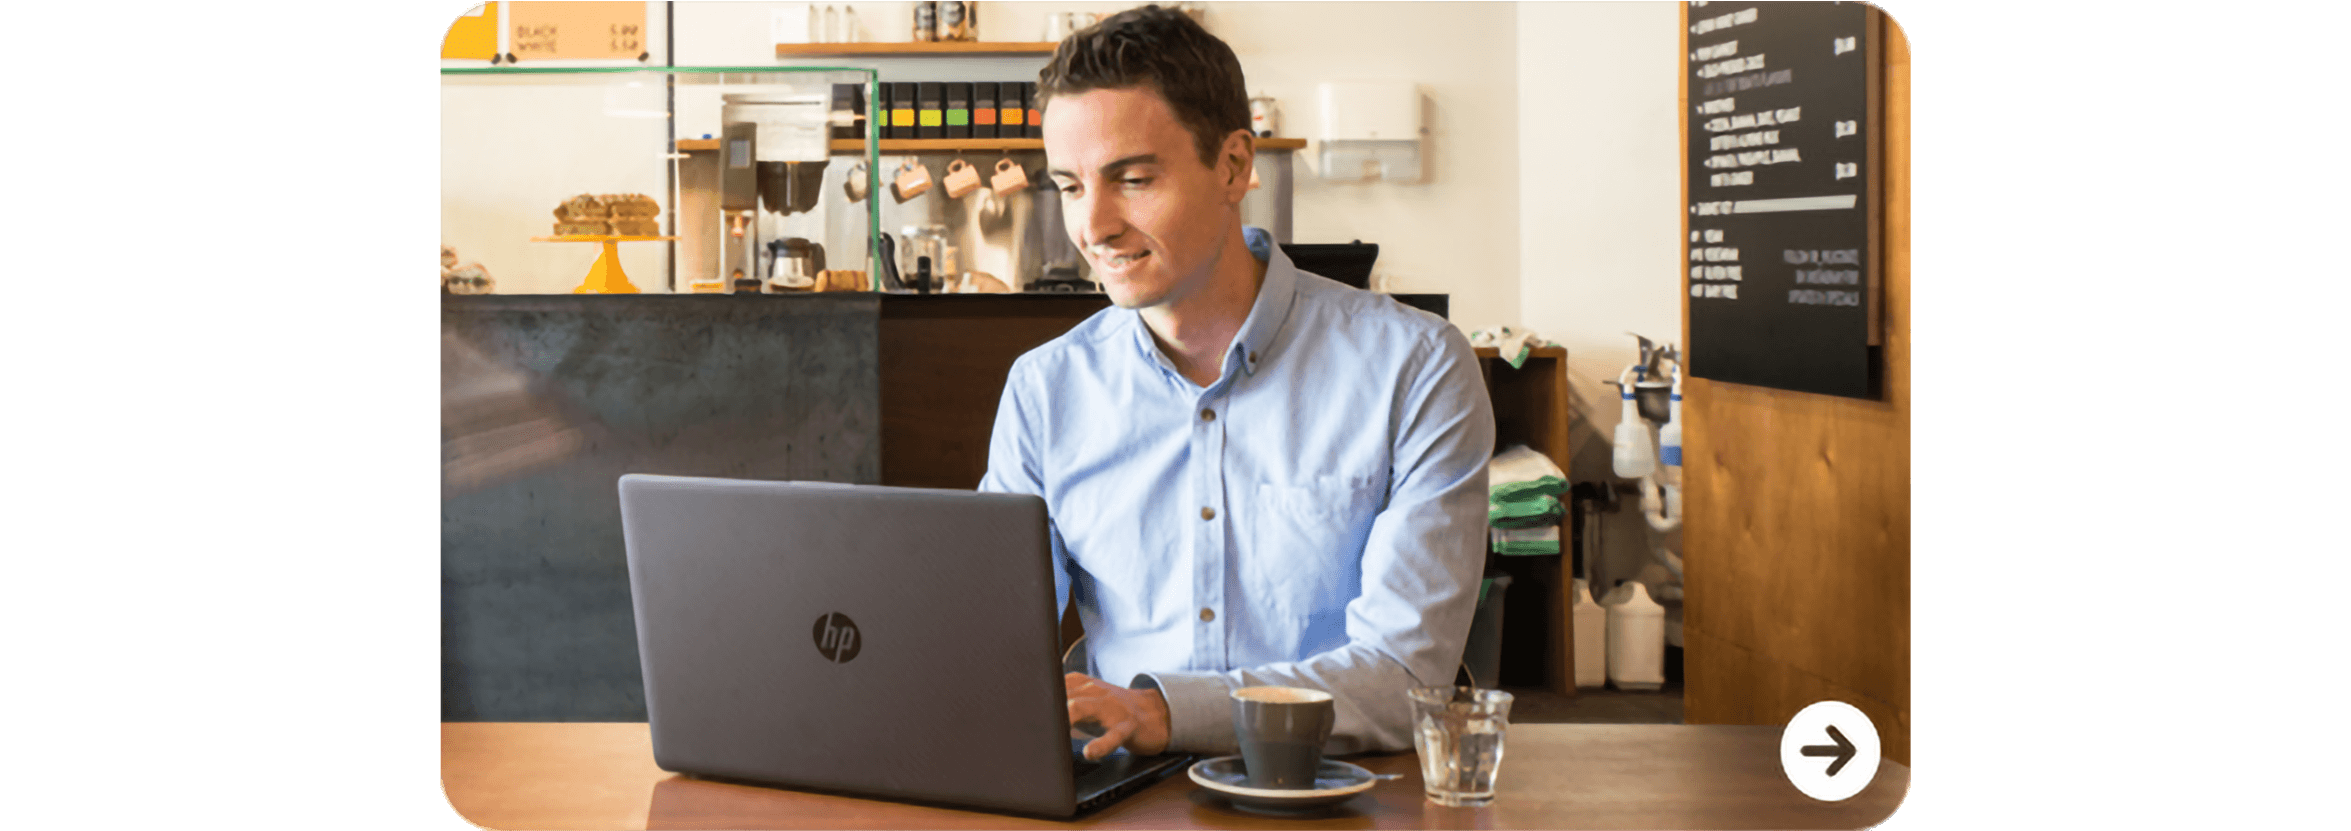 A cafe owner uses Xero on a laptop to keep the accounts up to date.